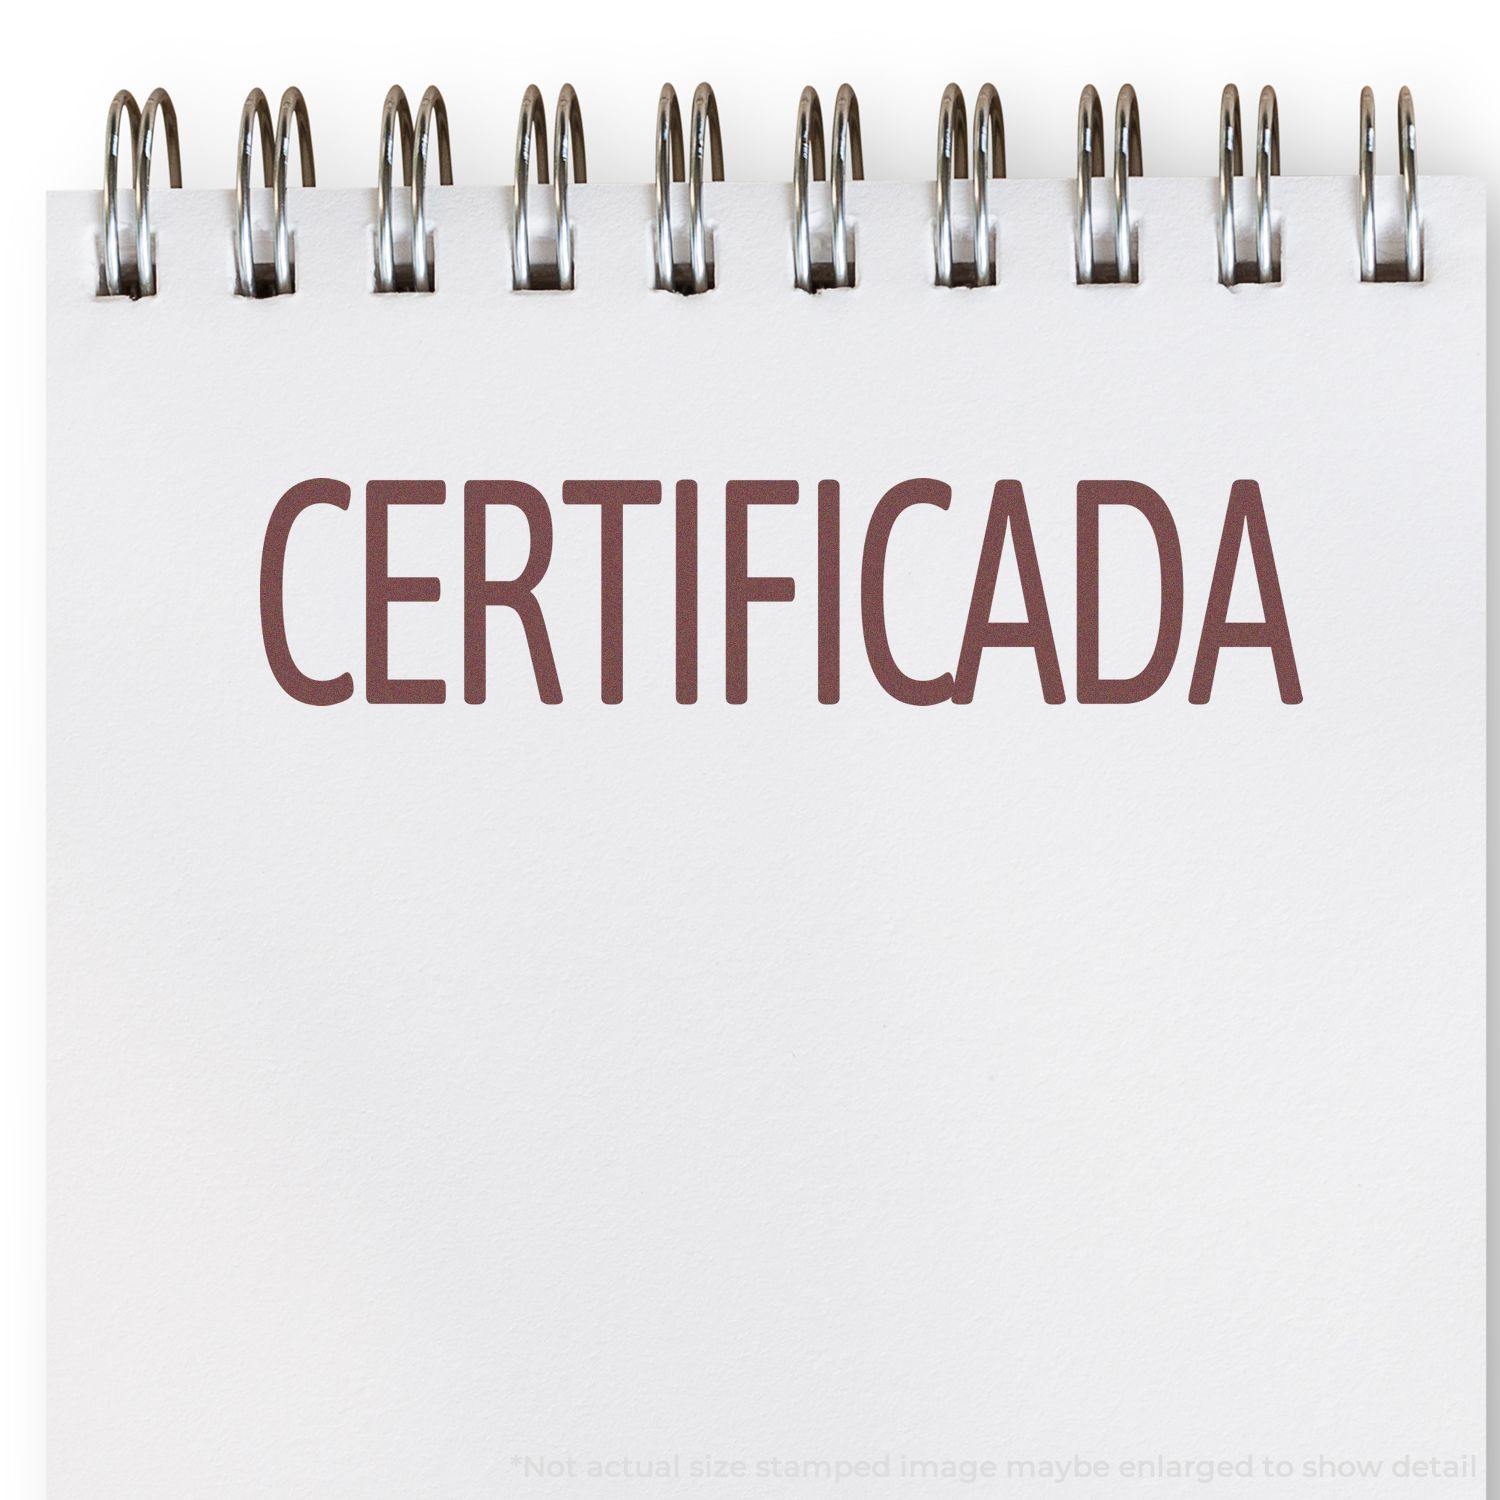 A self-inking stamp with a stamped image showing how the text "CERTIFICADA" is displayed after stamping.